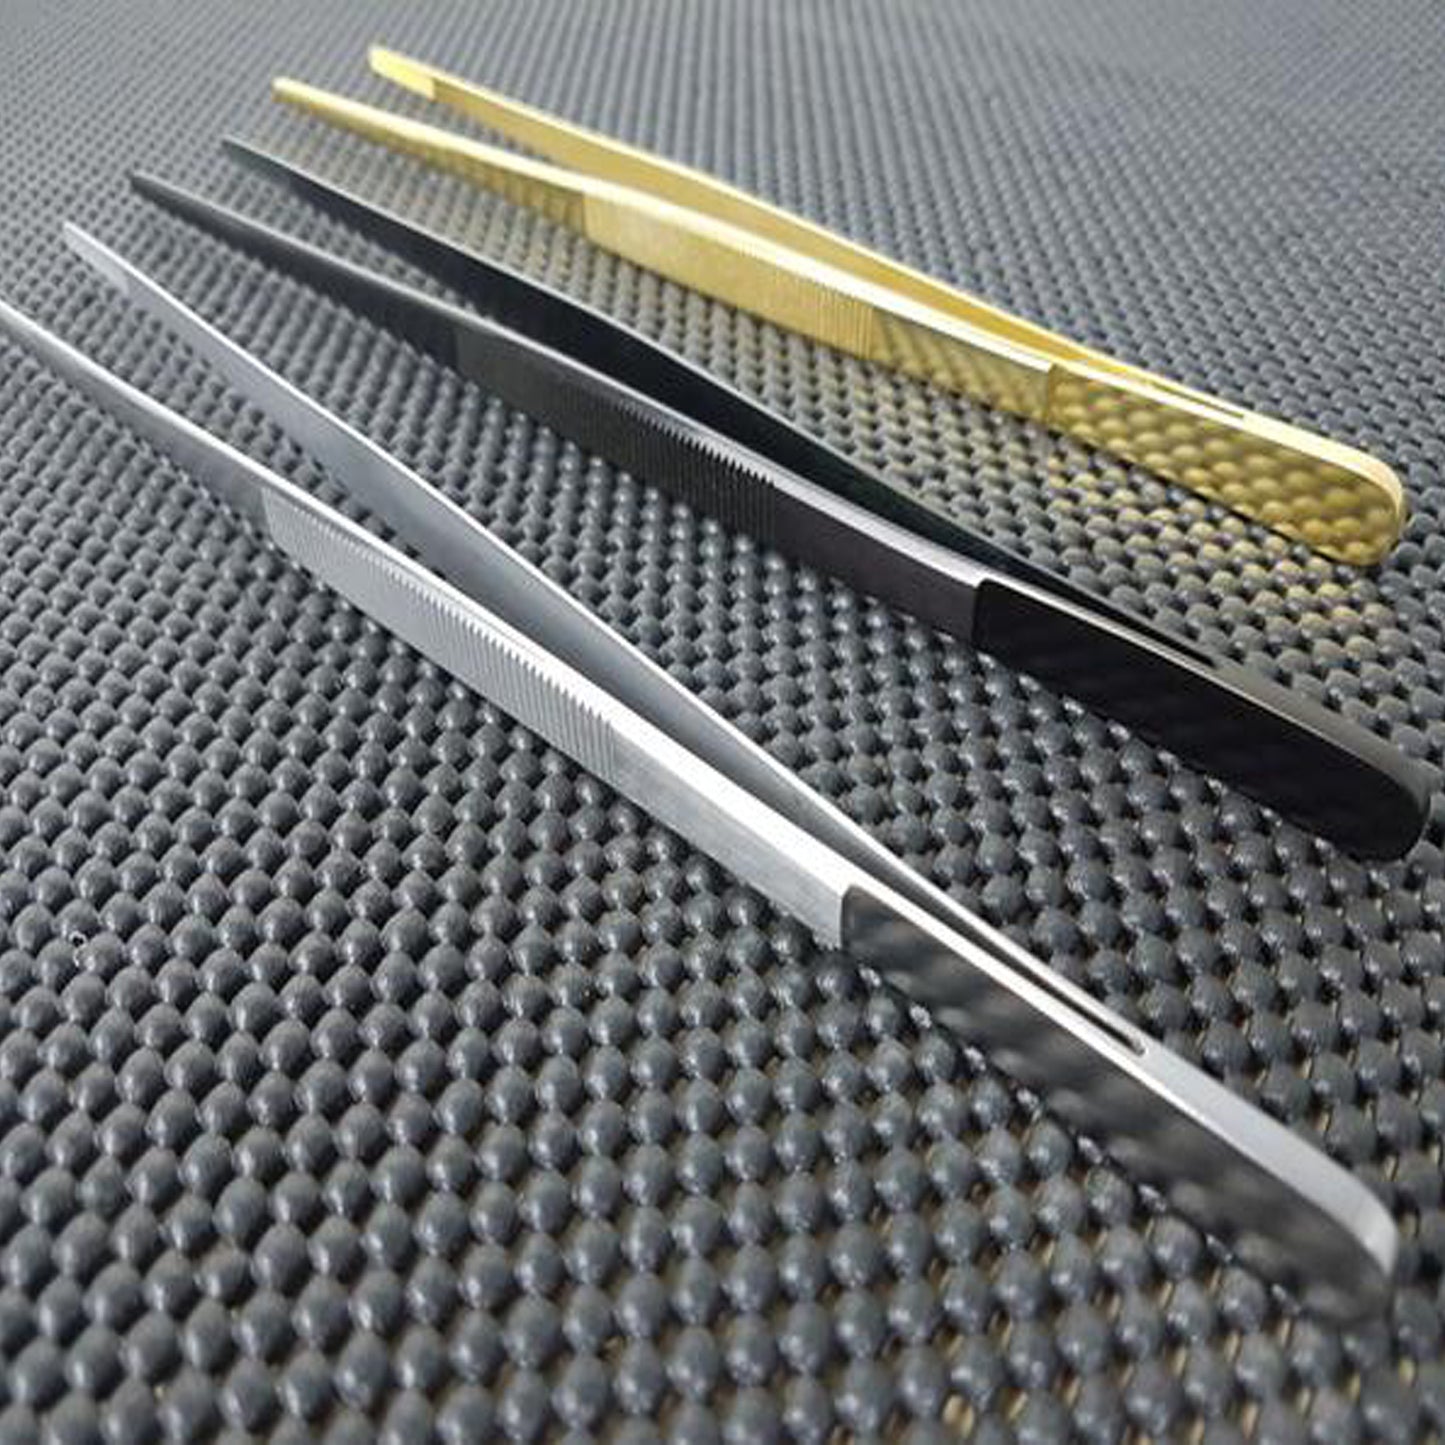 Culinary Tools Straight Tweezers (300mm) Gold